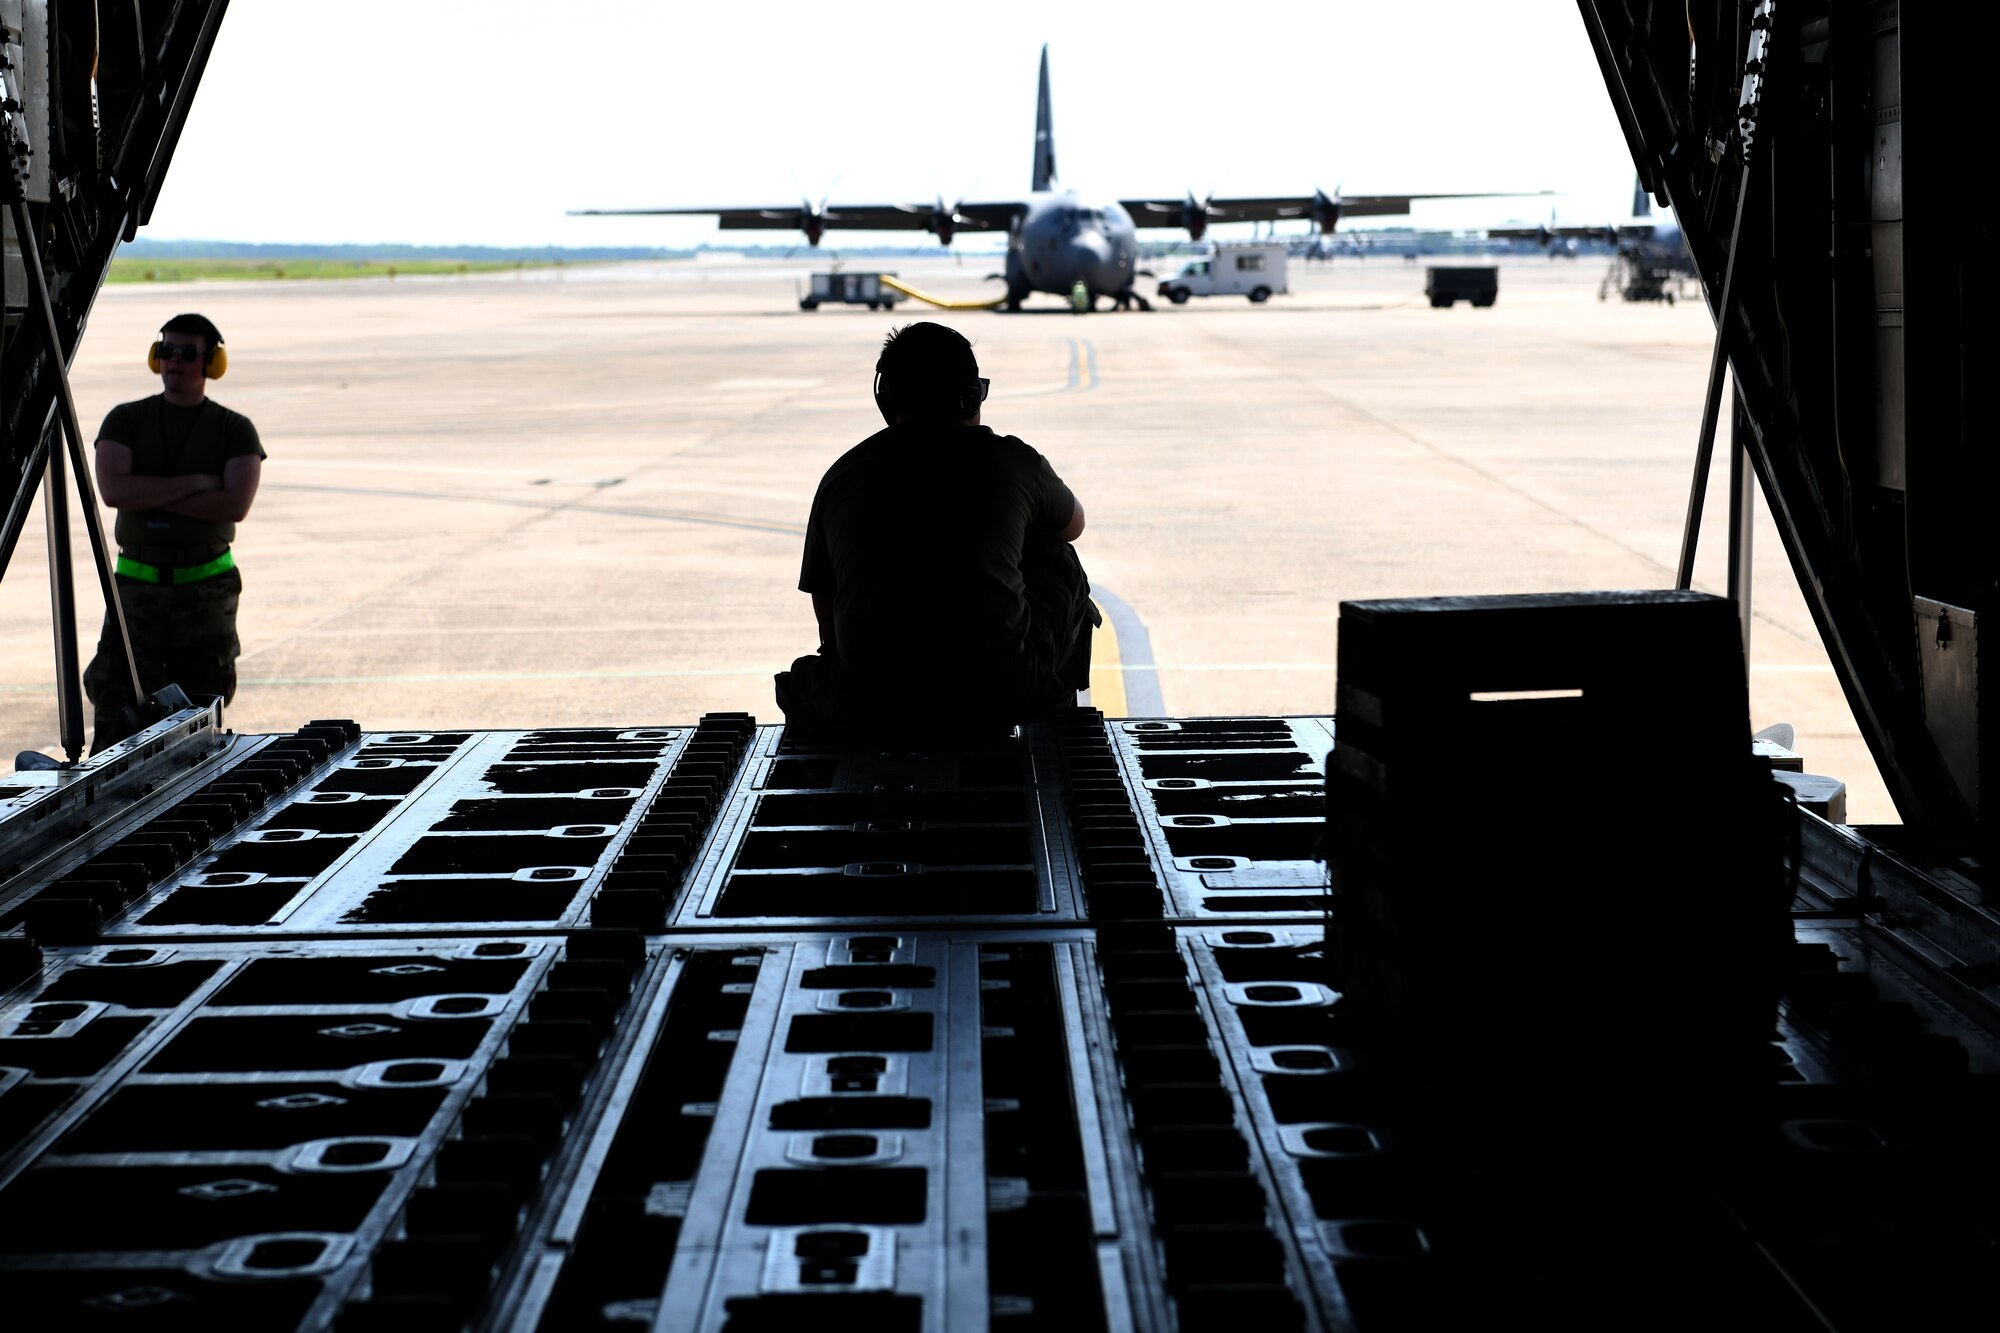 Maintainers wait to send-off a C-130J Super Hercules for a Joint Forcible Entry exercise at Little Rock Air Force Base, Arkansas, June 6, 2020. Each C-130J within the JFE exercise simulated dropping approximately 70 paratroopers while in the formation. (U.S. Air Force photo by Senior Airman Kristine M. Gruwell)